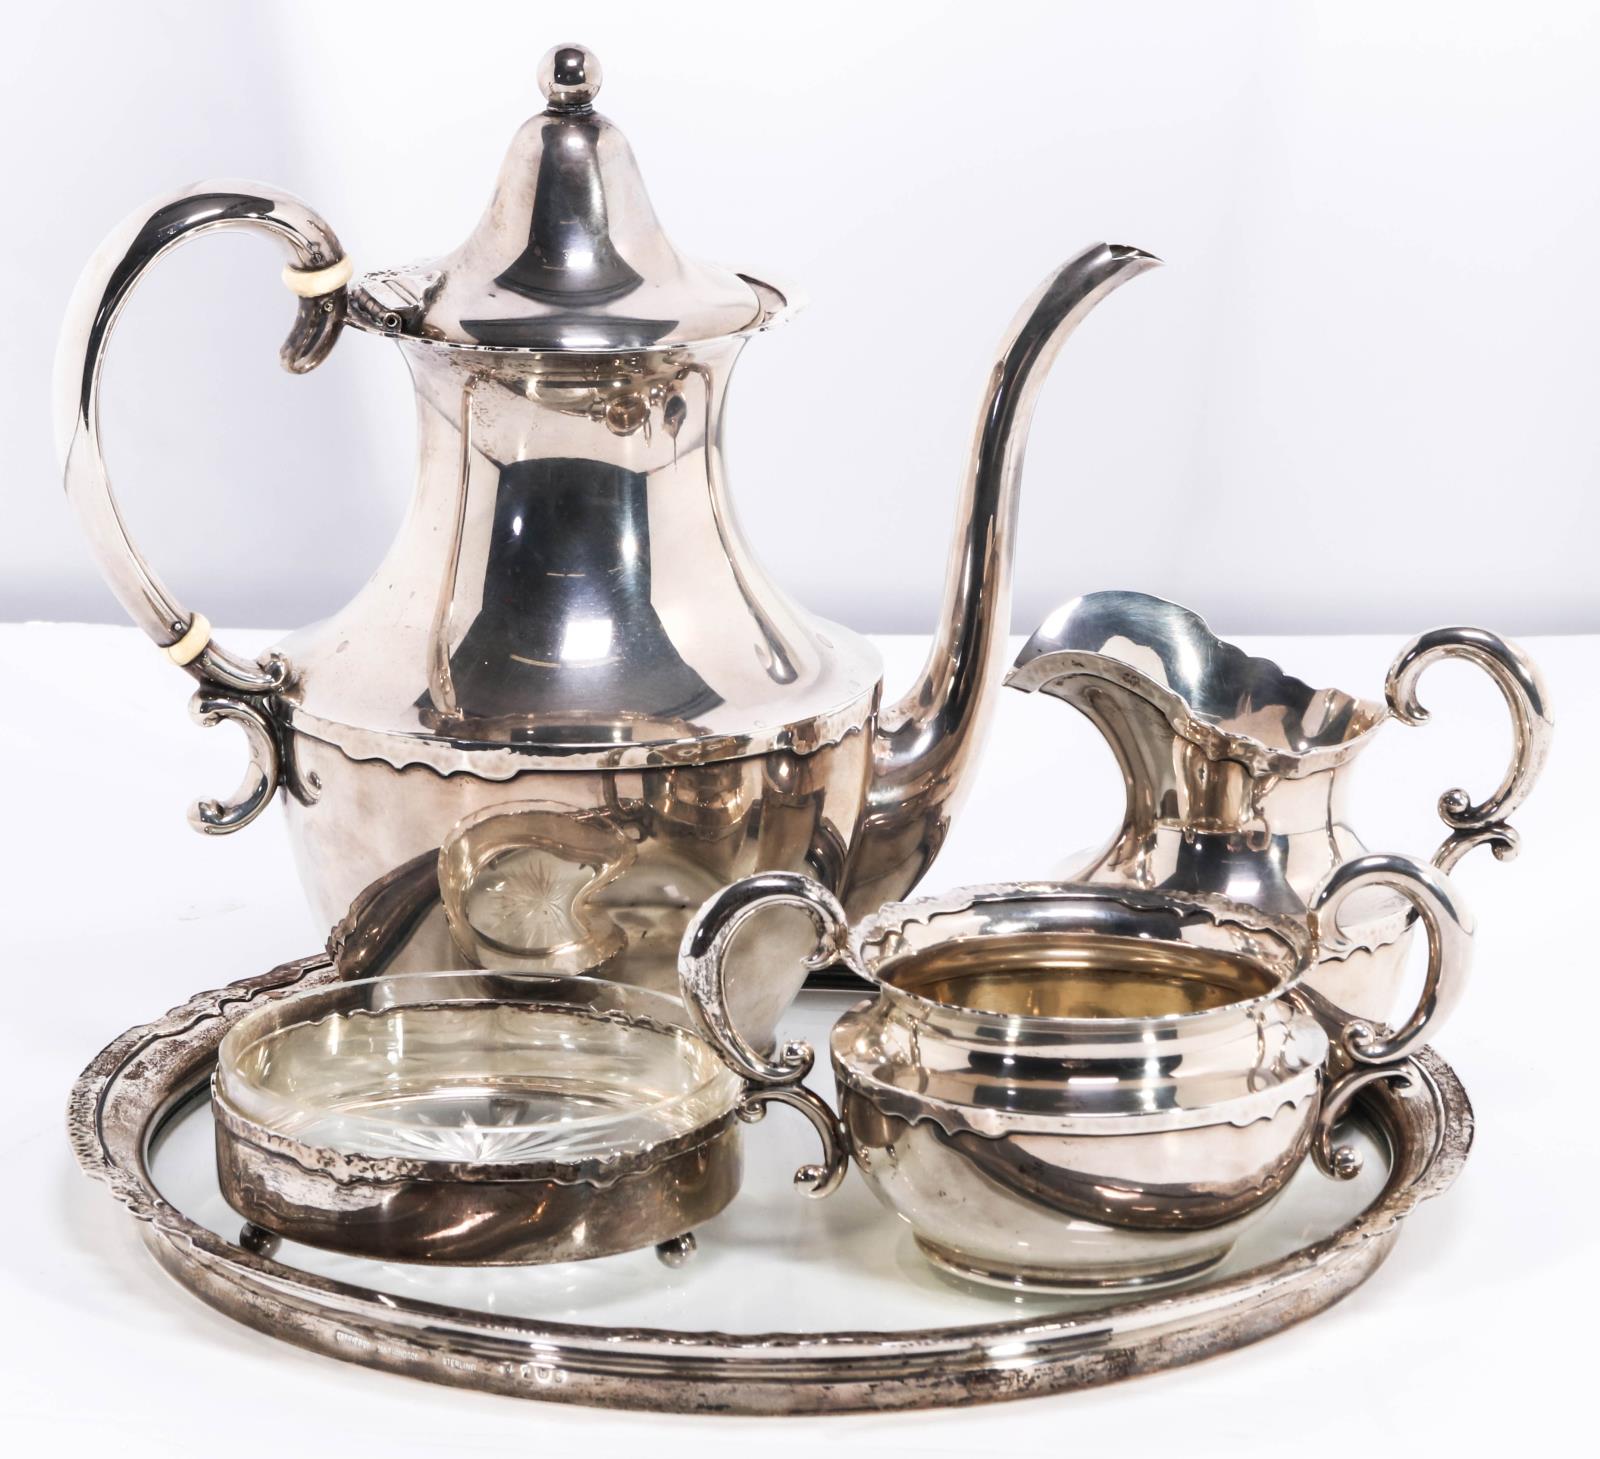 A SHREVE AND CO HAMMERED STERLING COFFEE SET 1913